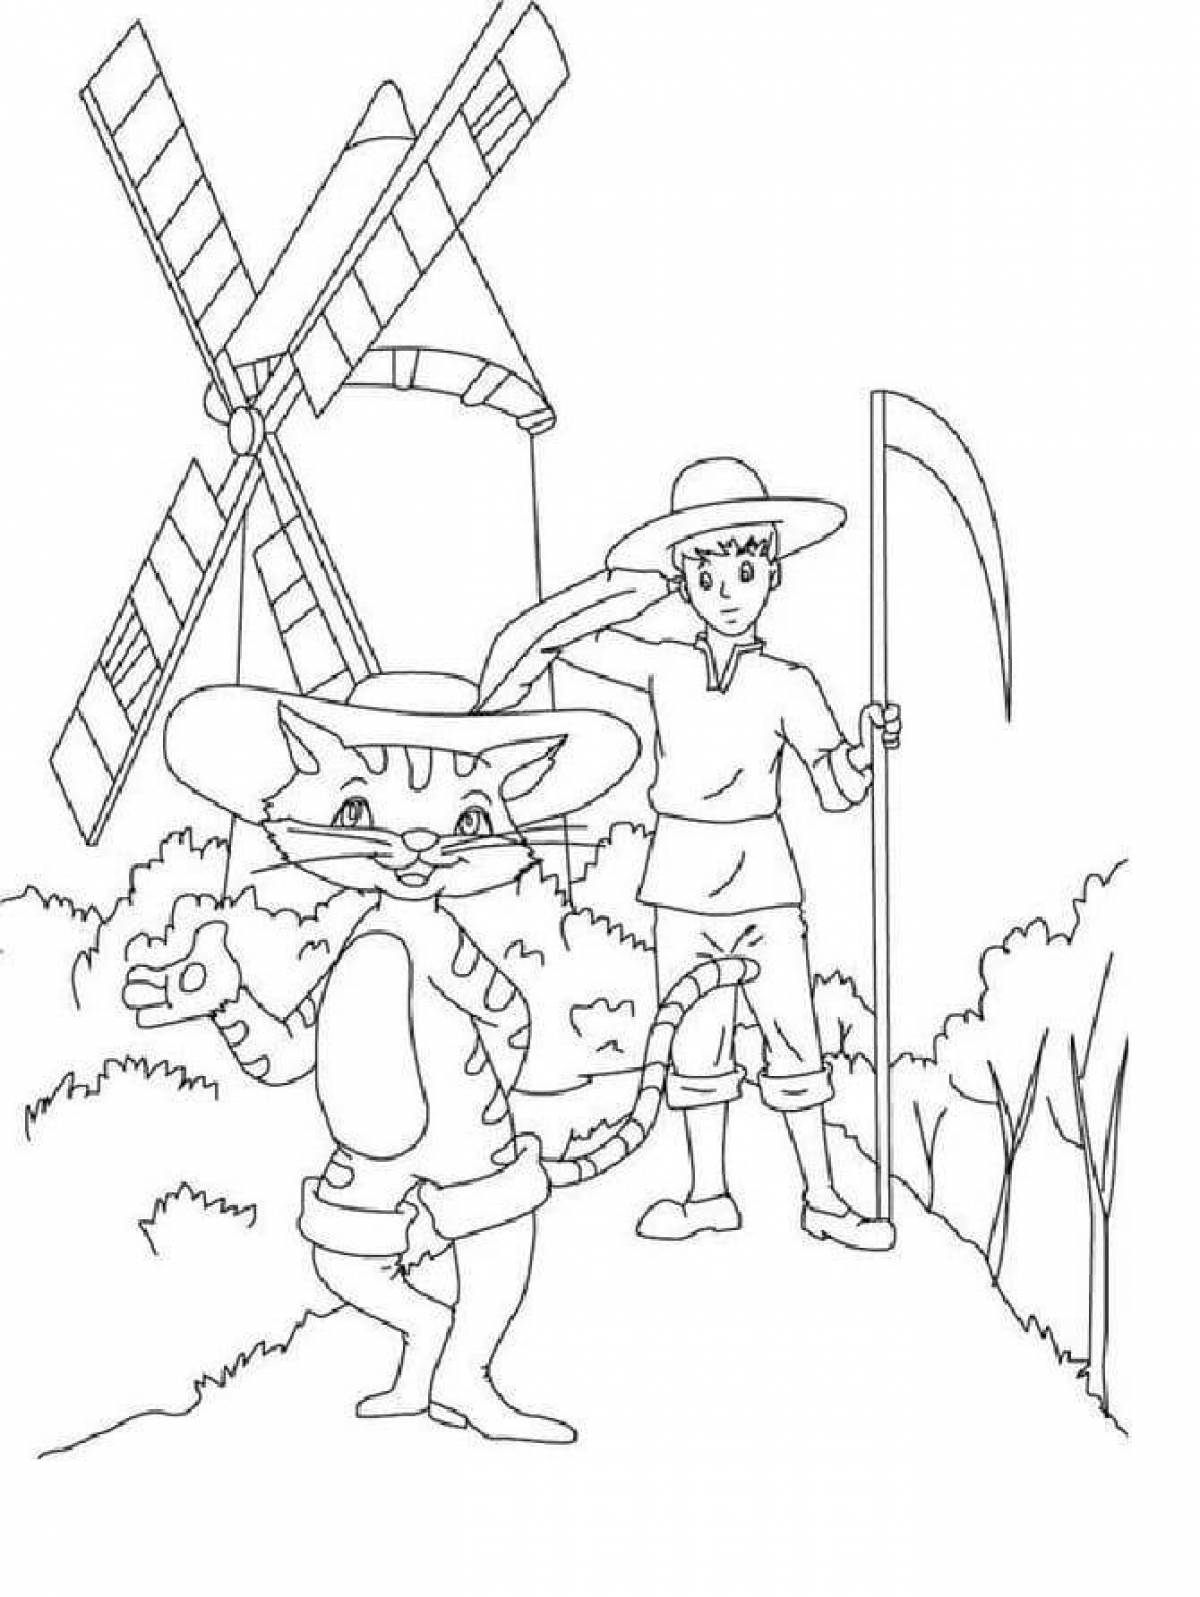 Charles Perrault's witty Puss in Boots coloring book